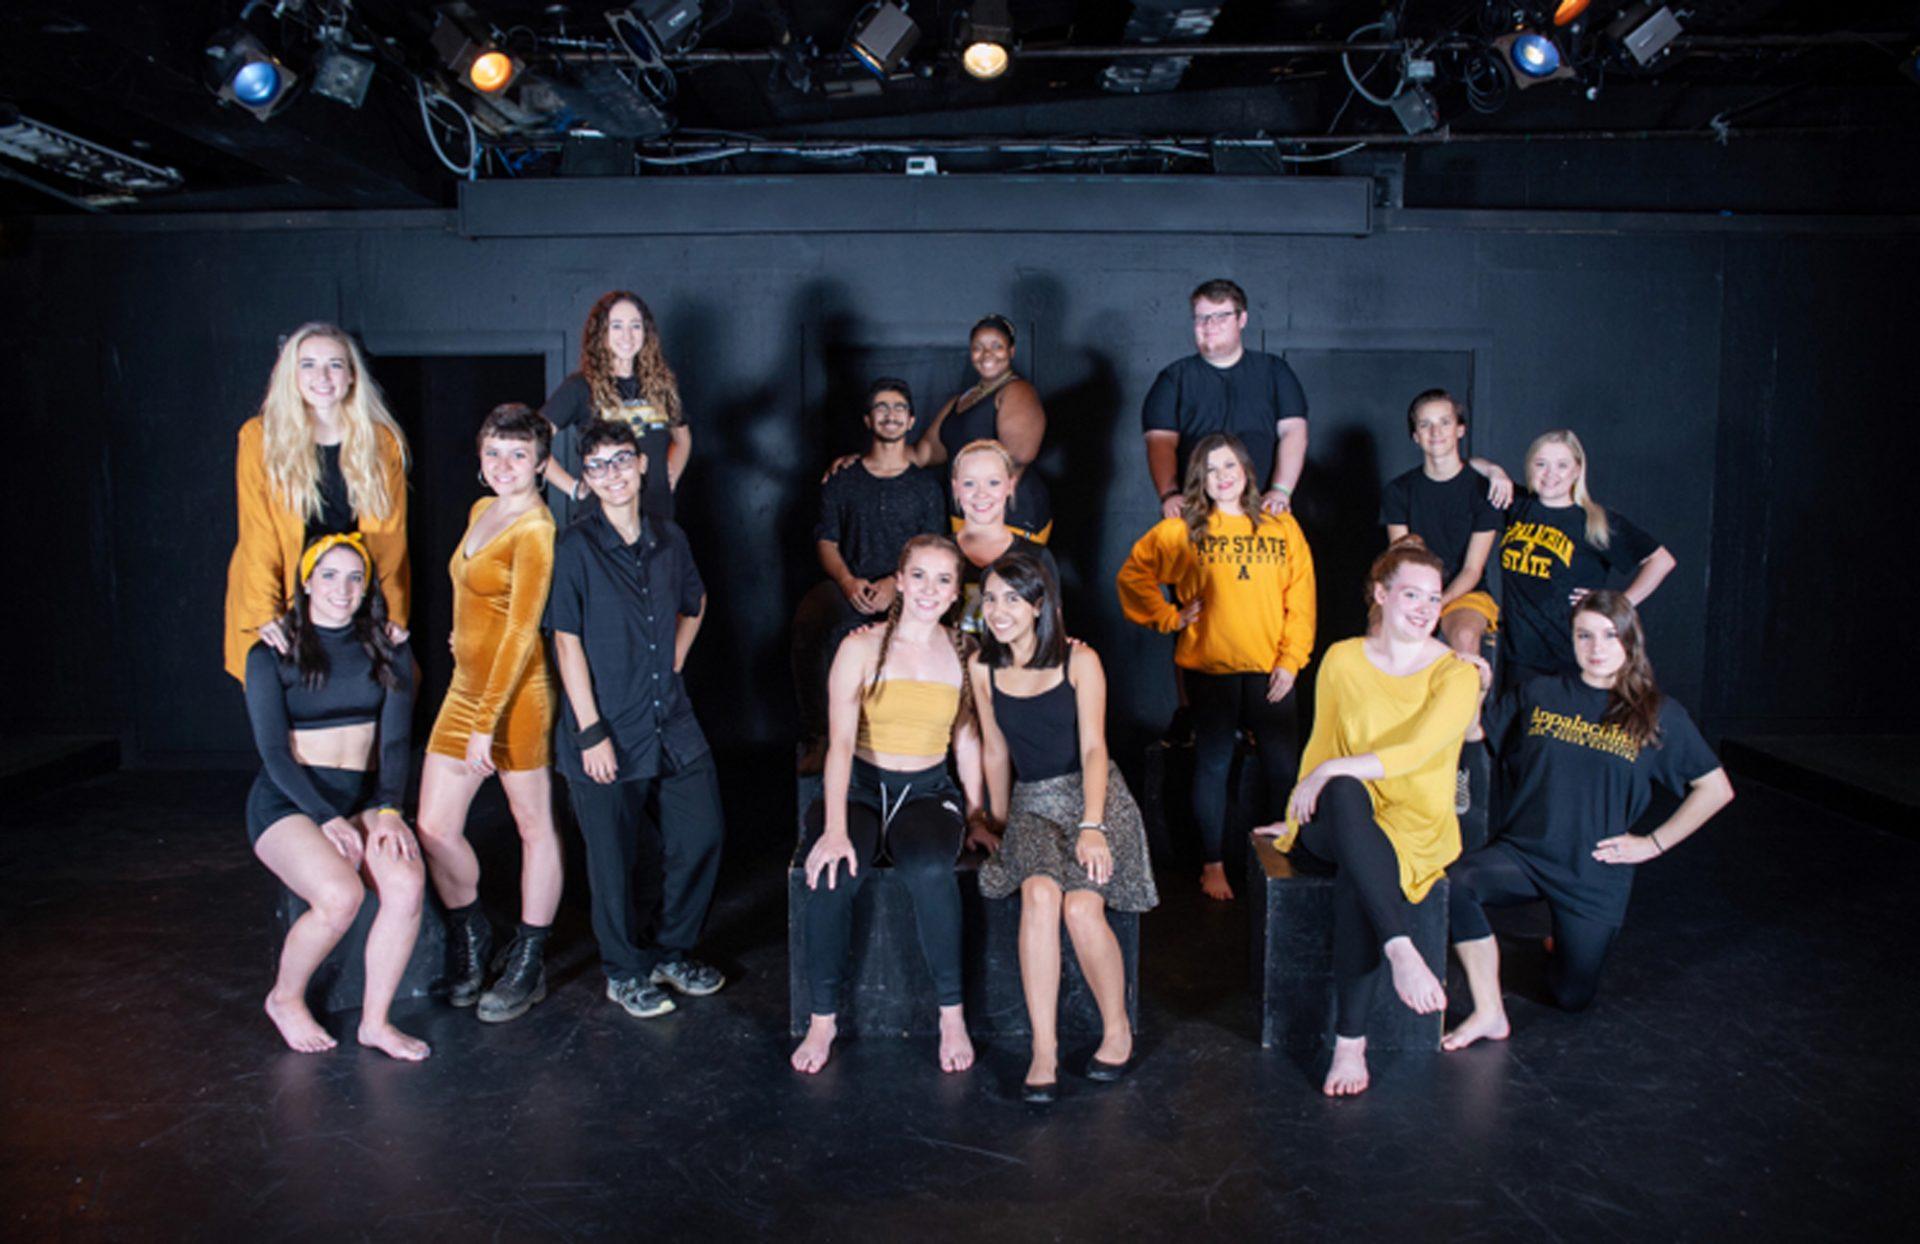 73 students will be preforming for the Department of Theatre and Dance’s First Year Showcase, a record number. The showcase will coincide with Homecoming week this year and tickets can be purchase at the Schaefer Center for Preforming Arts either at the ticket office or online. 